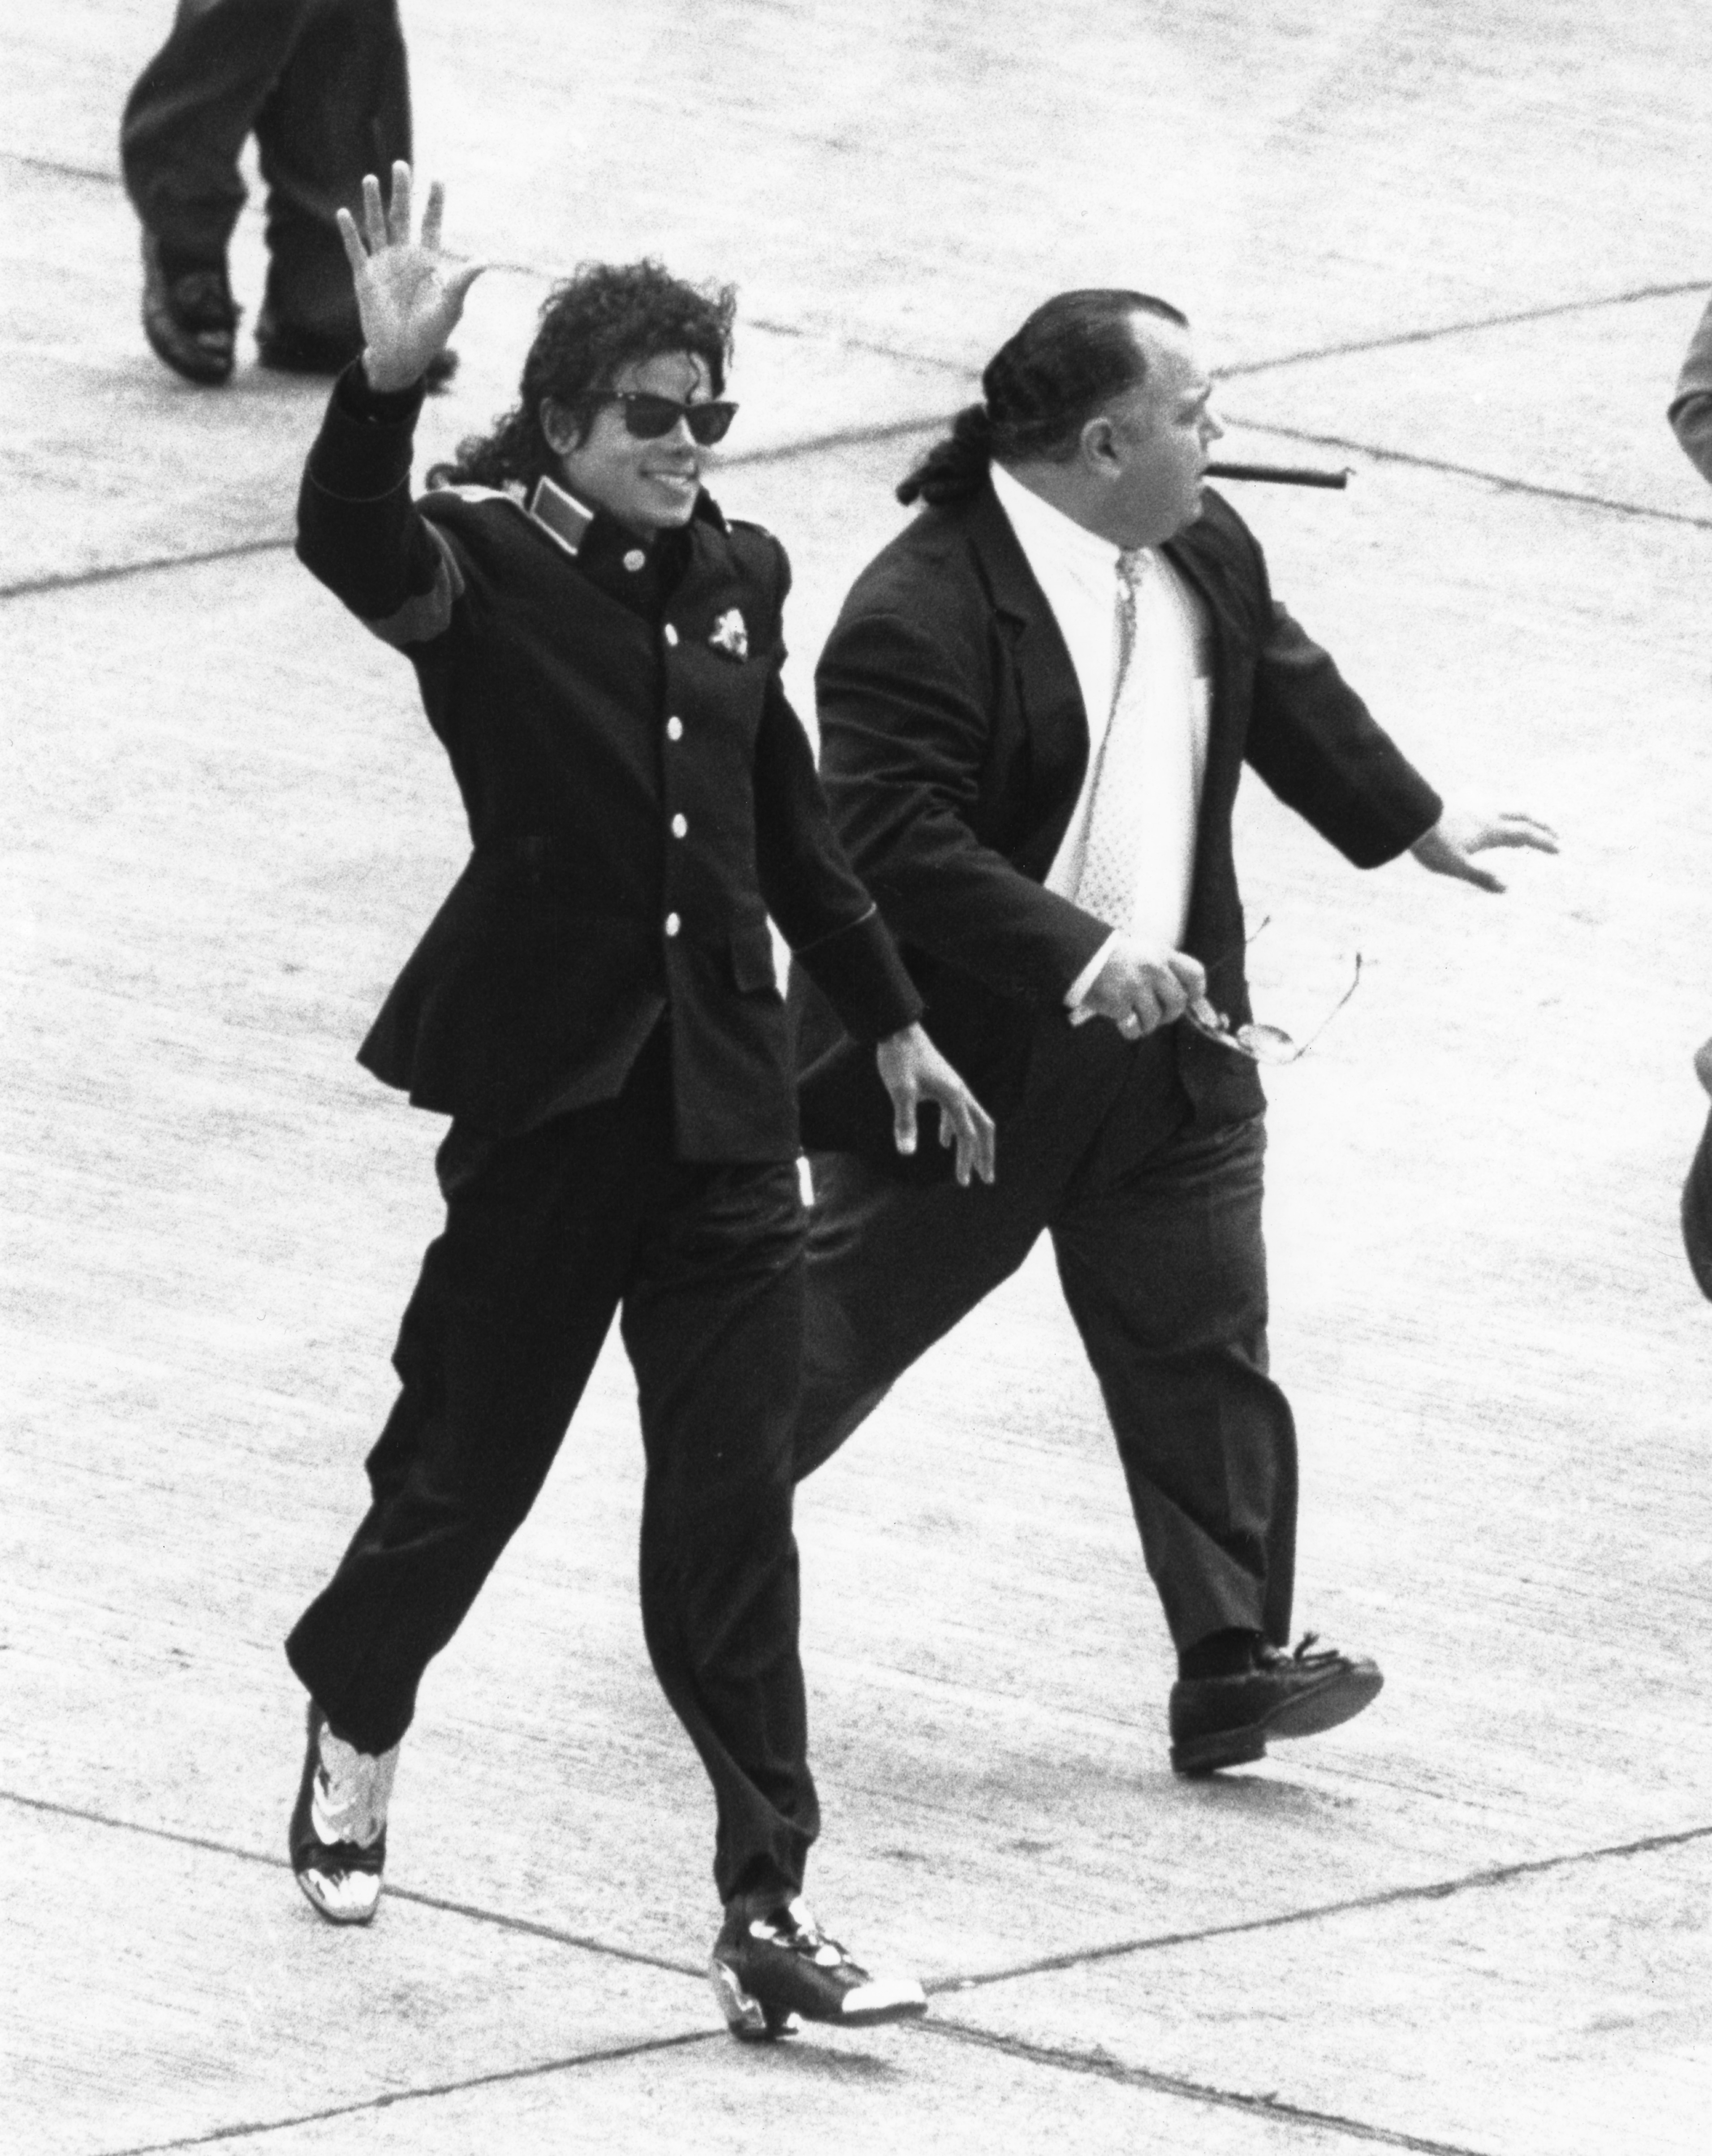 American singer Michael Jackson (1958 - 2009) arrives at Heathrow Airport with his manager Frank DiLeo, on his Bad World Tour, 11th July 1988. (Photo by Dave Hogan/Getty Images) (Foto: Getty Images)